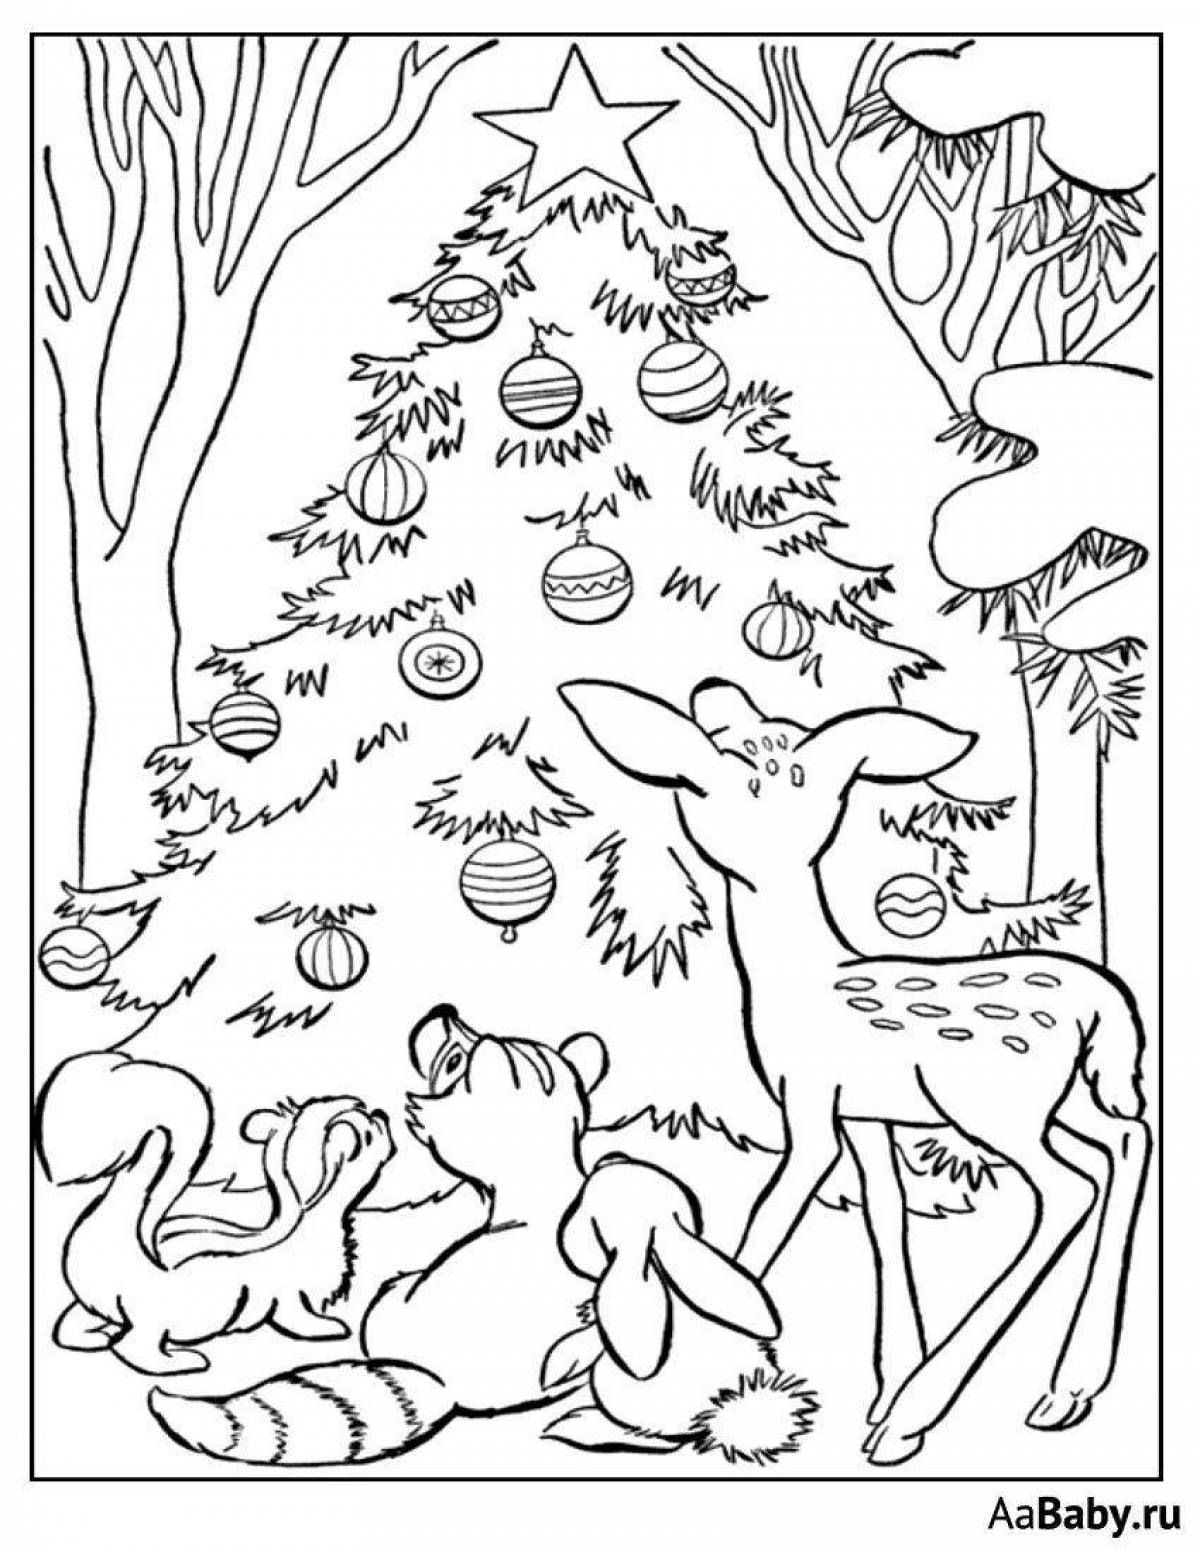 Bright christmas tree and bunny coloring page